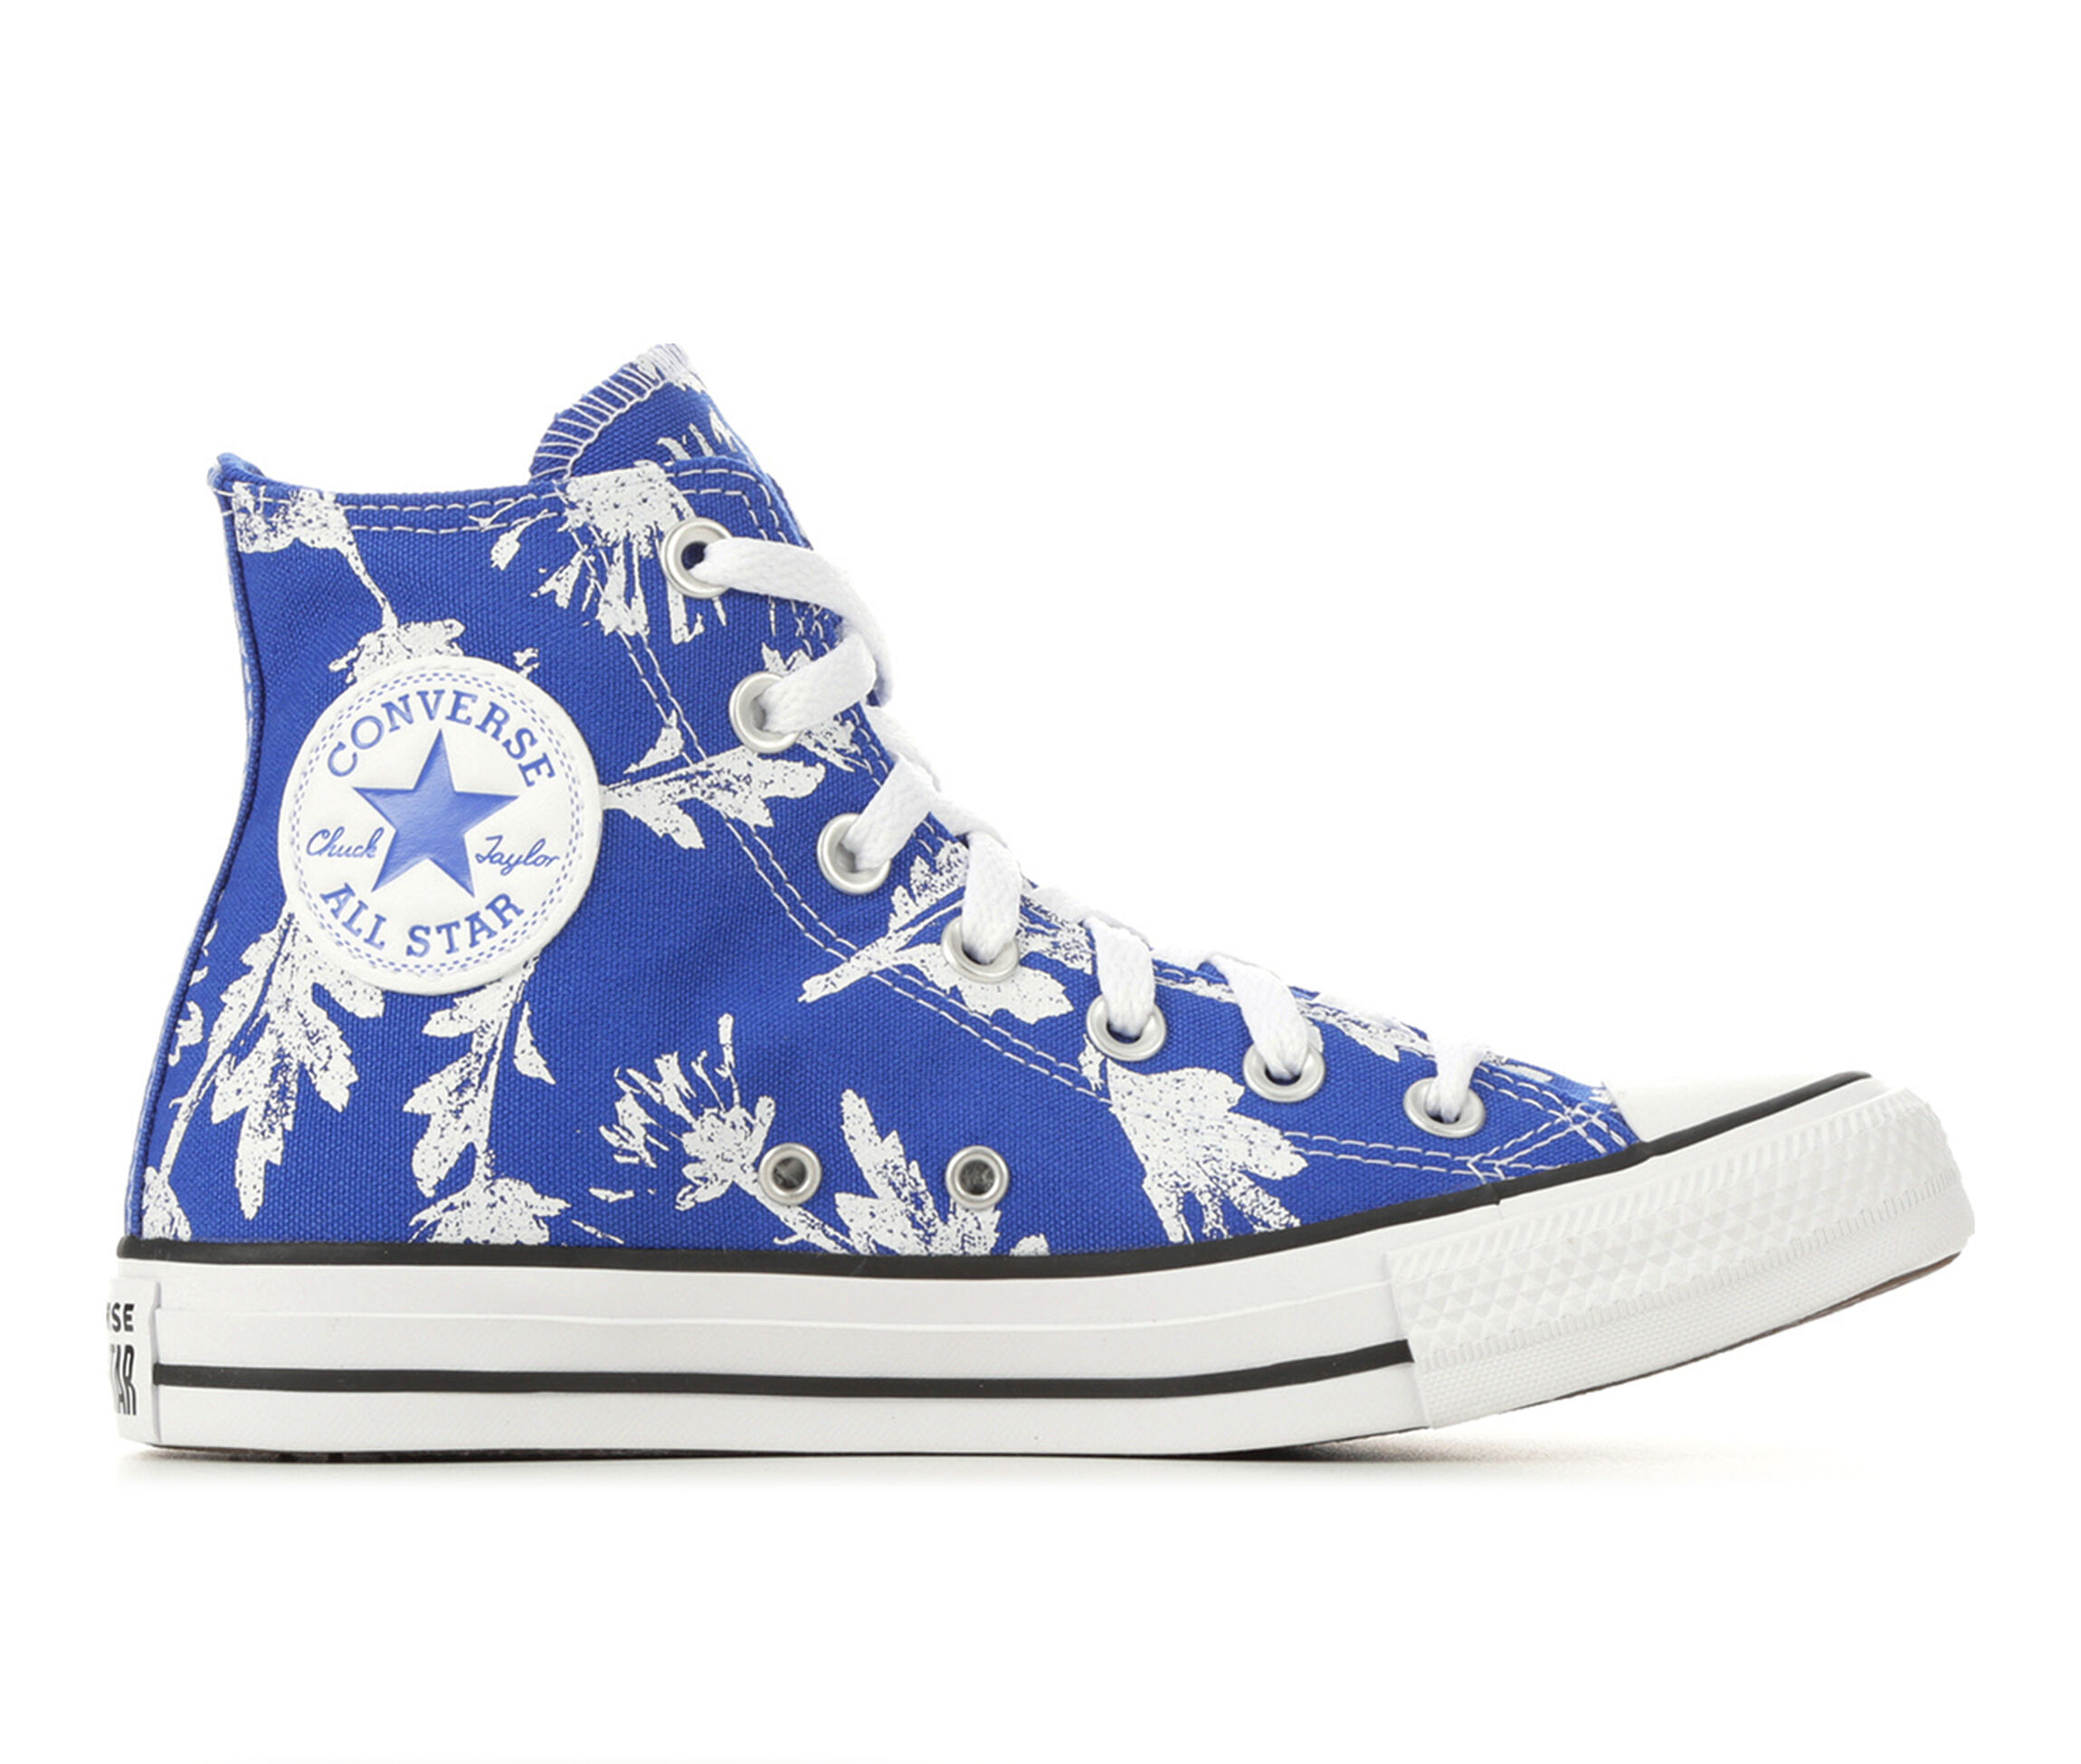 Women's Converse Chuck Taylor All Star Floral Hi Sneakers